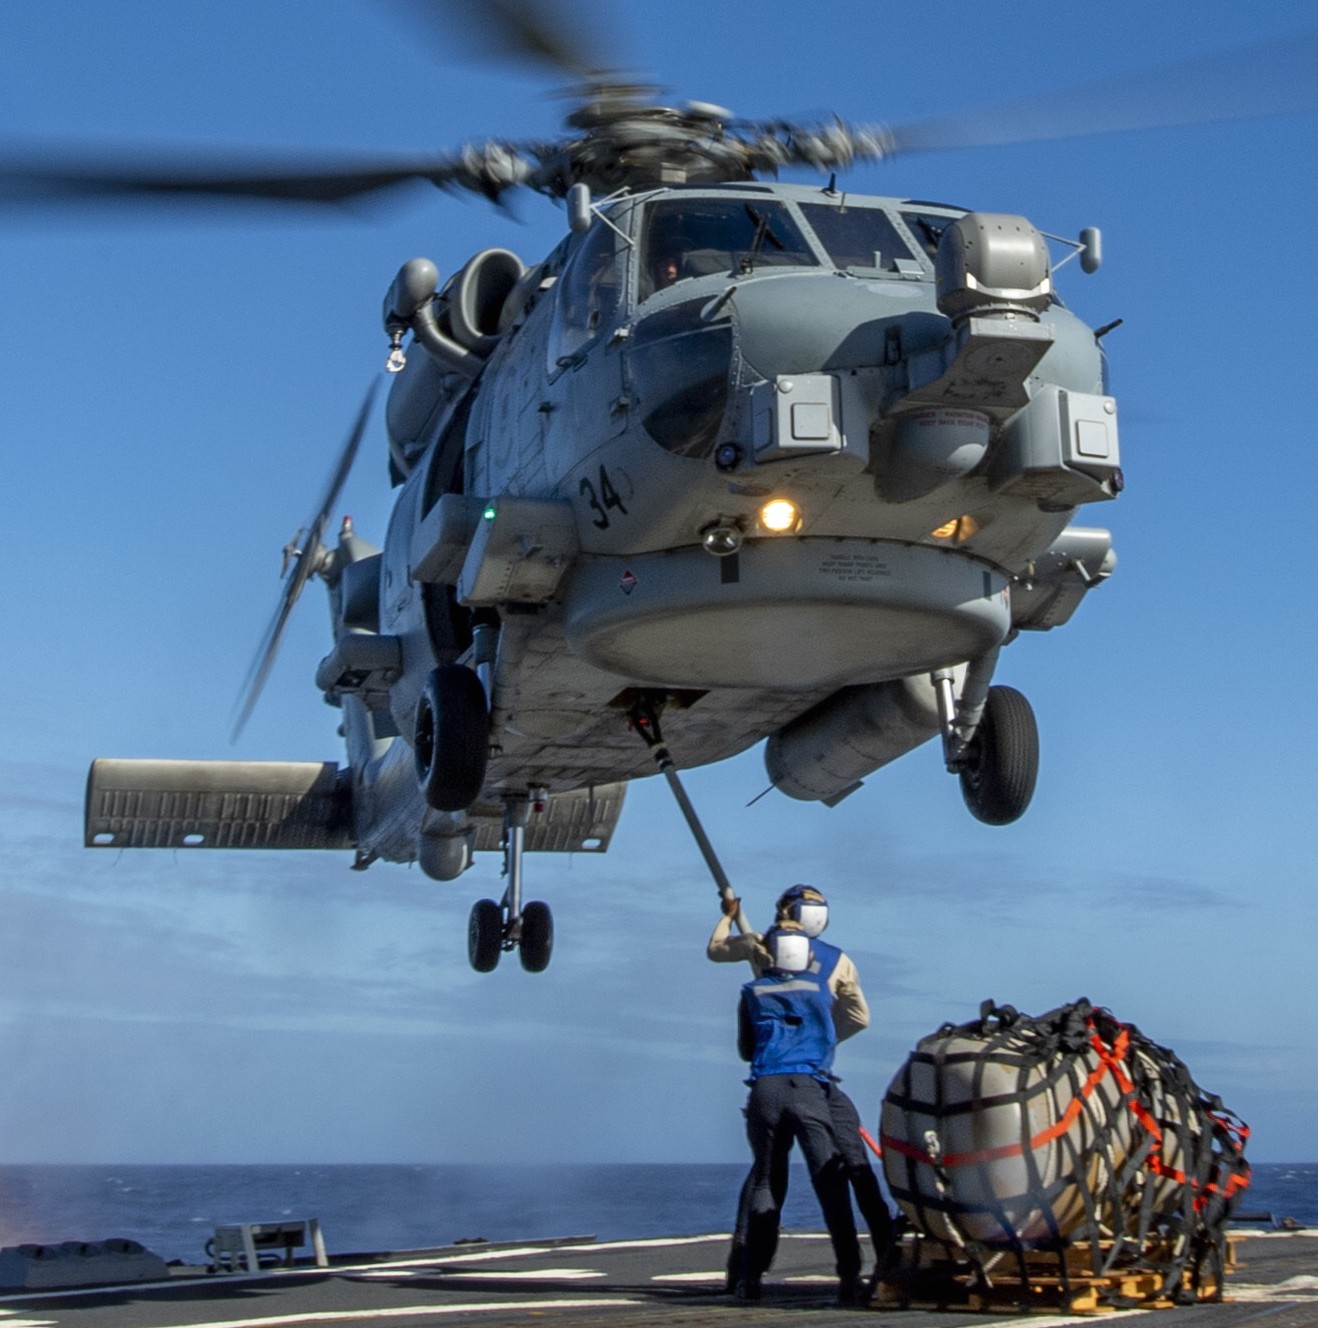 hsm-35 magicians helicopter maritime strike squadron us navy mh-60r seahawk 56